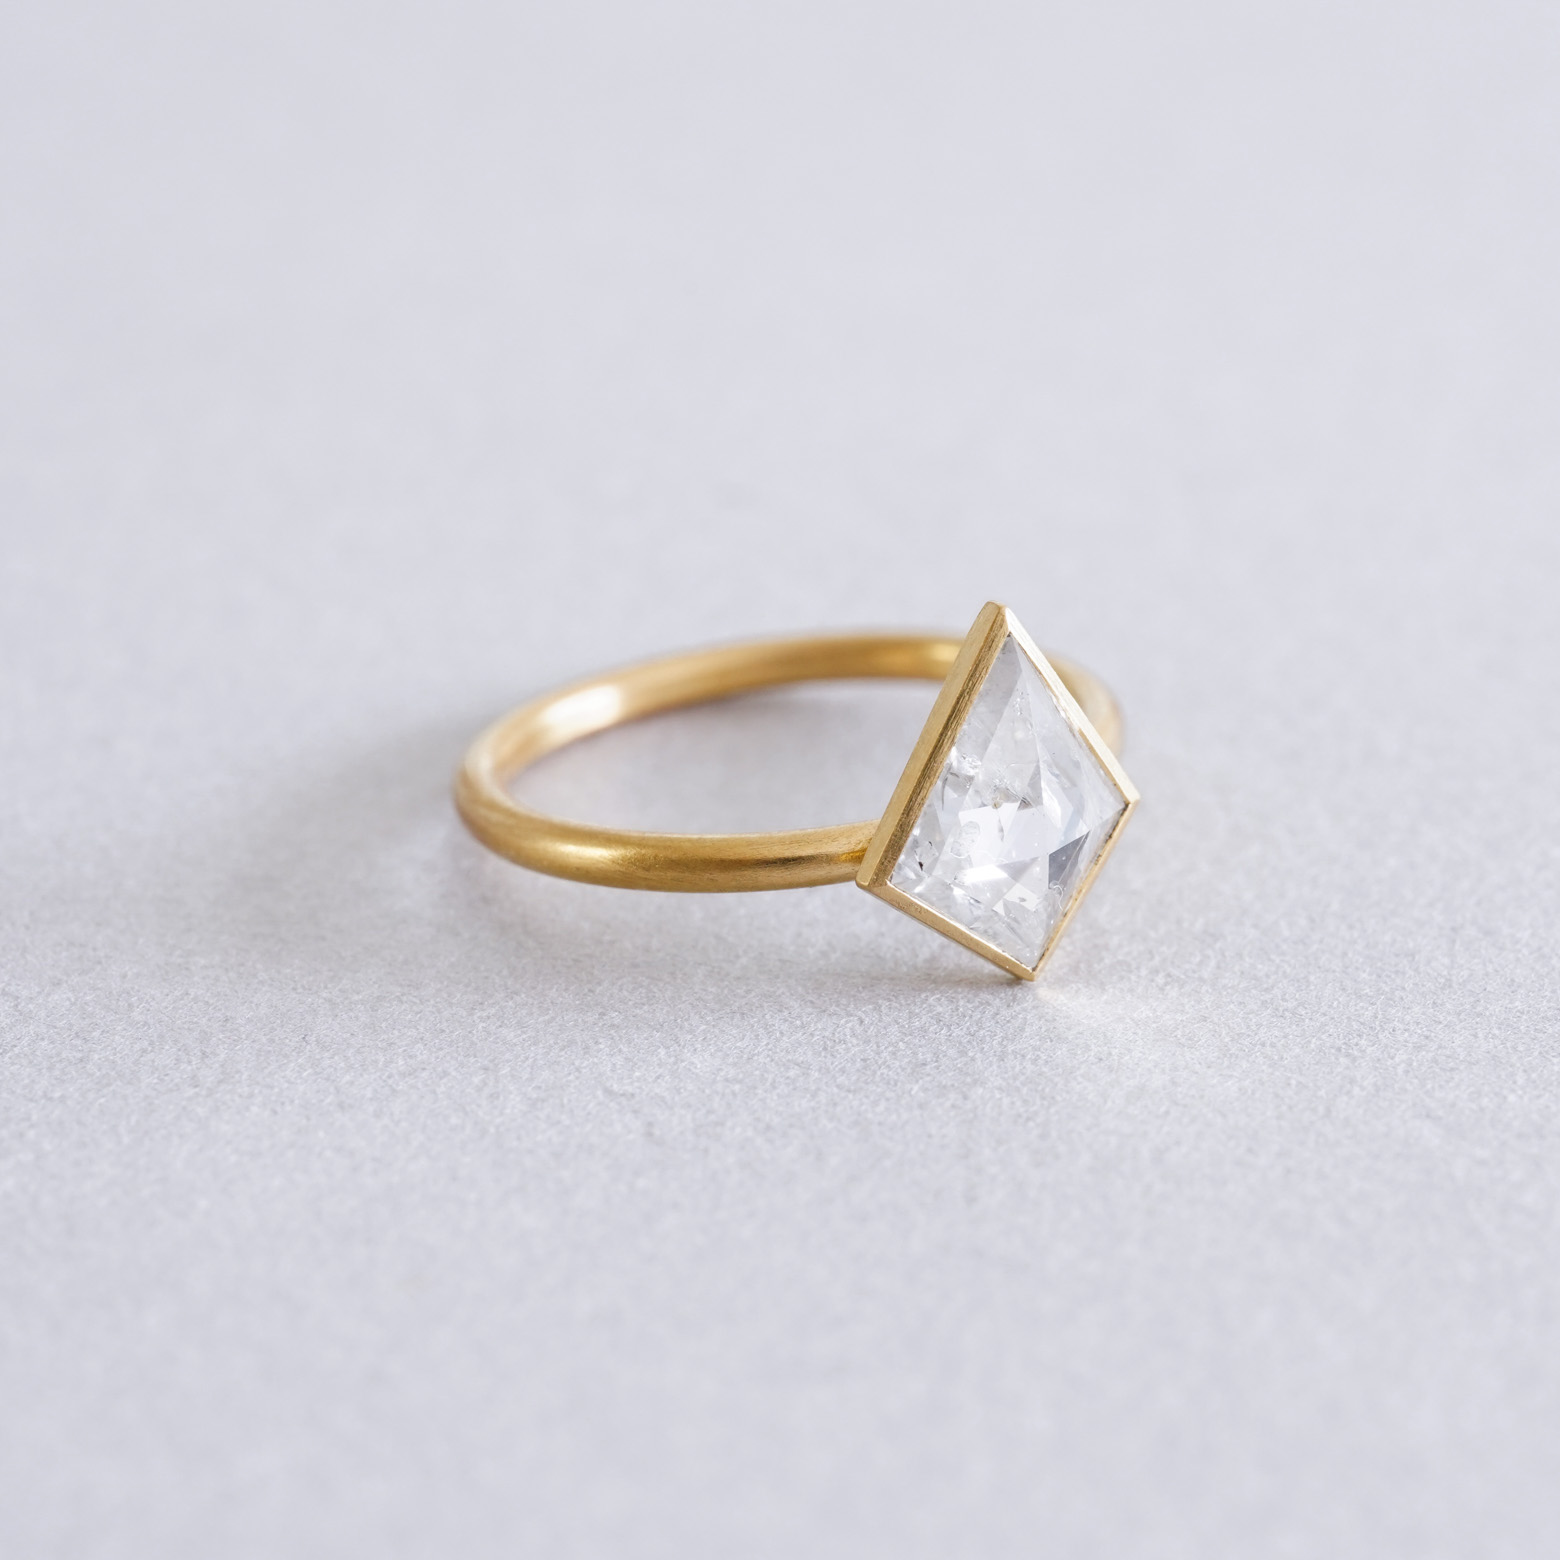 Kite Shape Icy Rosecut Diamond Ring (SOURCE) - SOURCE objects